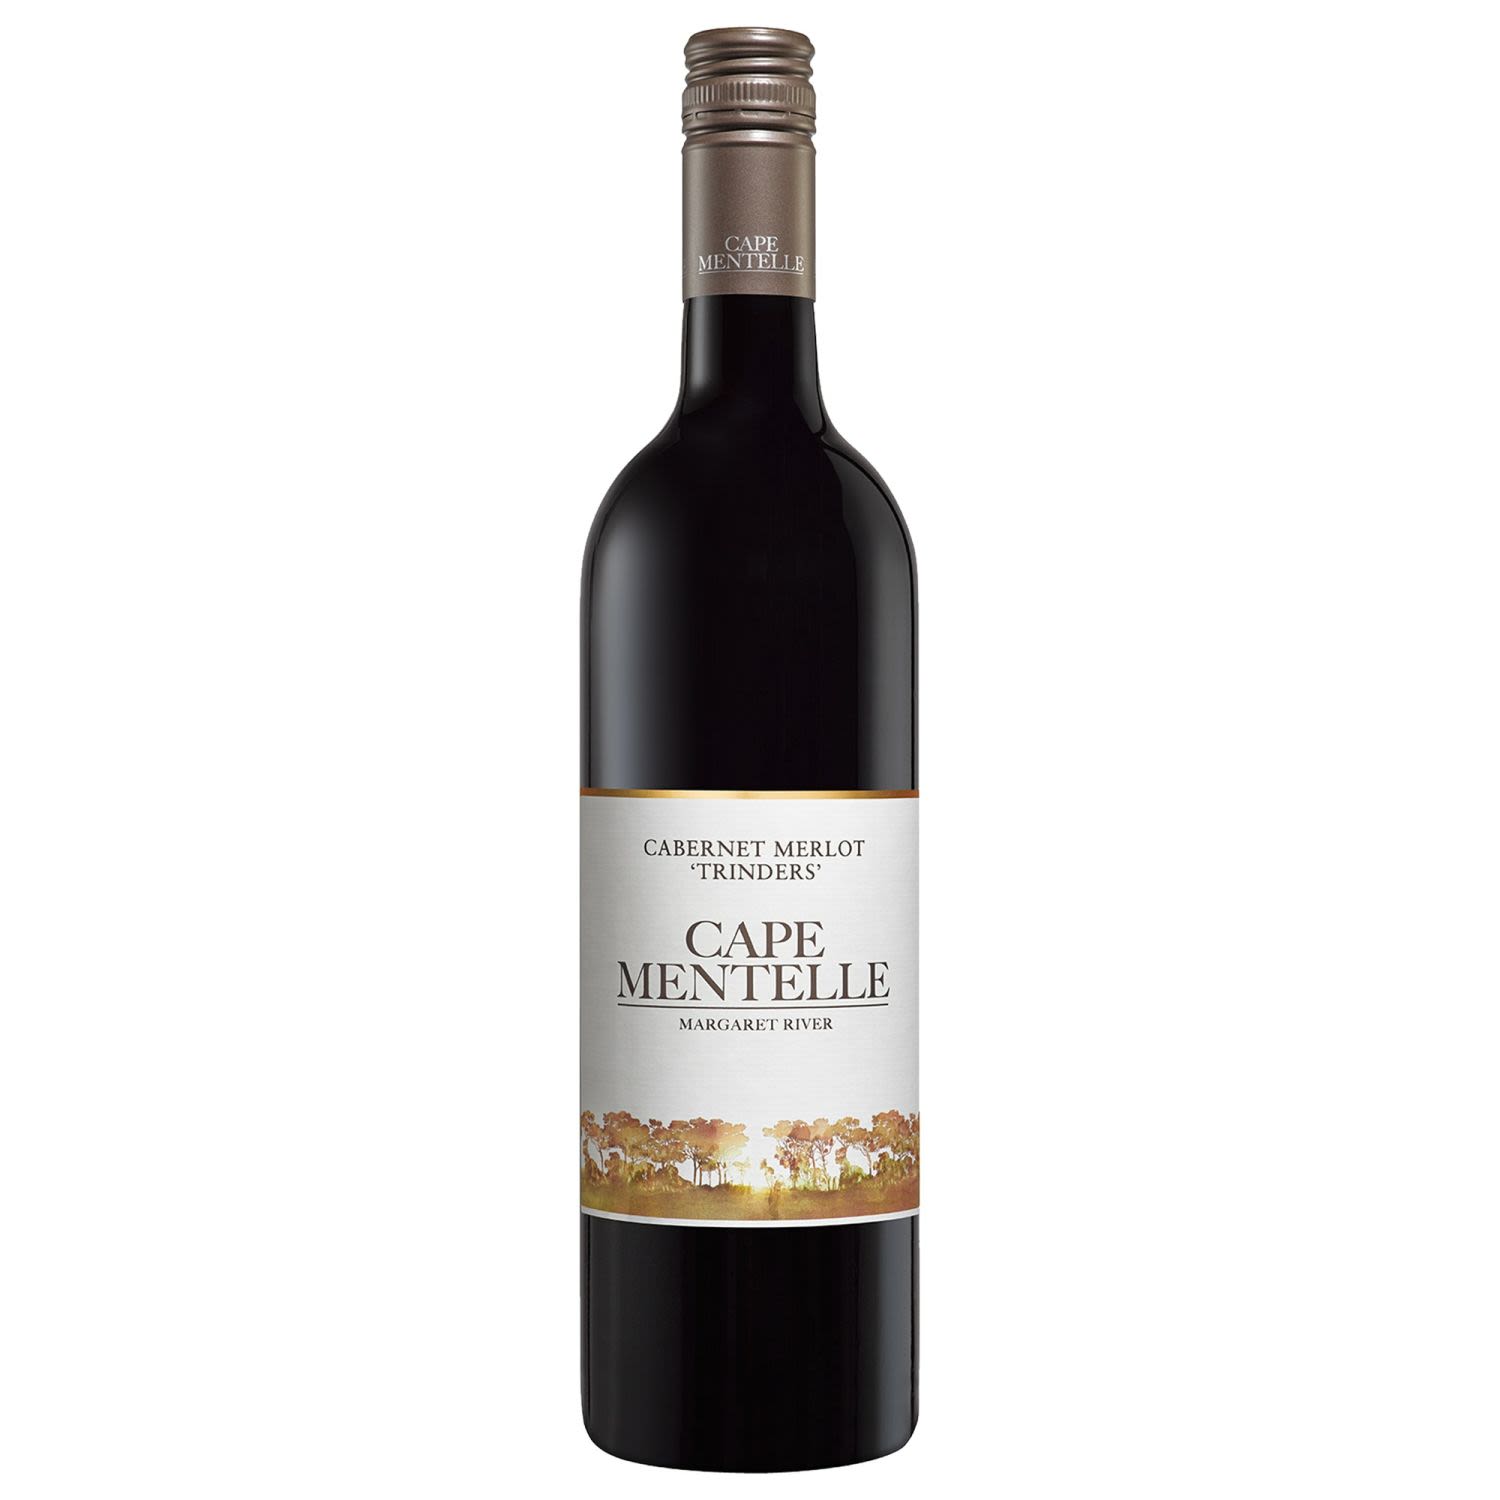 "The Trinders Vineyard was established in 1988 and named after a local school, the first in the Margaret River region. Cape Mentelle has developed an international reputation for these varieties that are perfectly suited to the climate and soils of Margaret River. This blend seeks to capture the depth and structure of Cabernet Sauvignon with the dark fruit and plush flavours of Merlot; small amounts of shiraz and cabernet franc complement the blend for a well-rounded, rich style with exquisite balance."<br /> <br />Alcohol Volume: 14.00%<br /><br />Pack Format: Bottle<br /><br />Standard Drinks: 3.3</br /><br />Pack Type: Bottle<br /><br />Country of Origin: Australia<br /><br />Region: Margaret River<br /><br />Vintage: '2016<br />